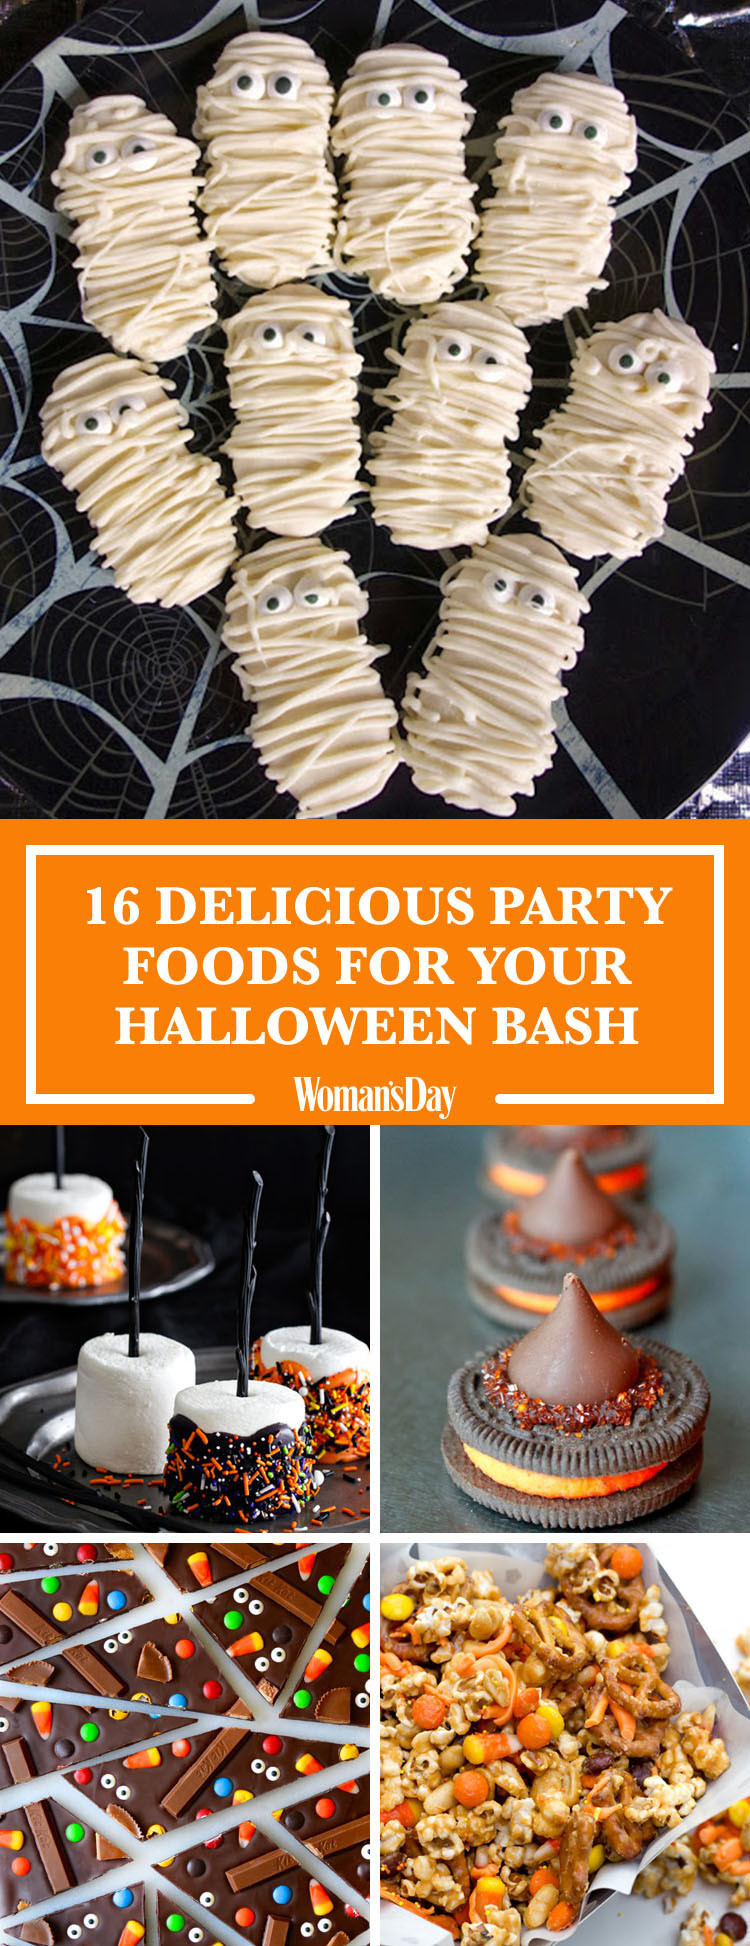 Halloween Party Snacks Ideas
 22 Easy Halloween Party Food Ideas Cute Recipes for